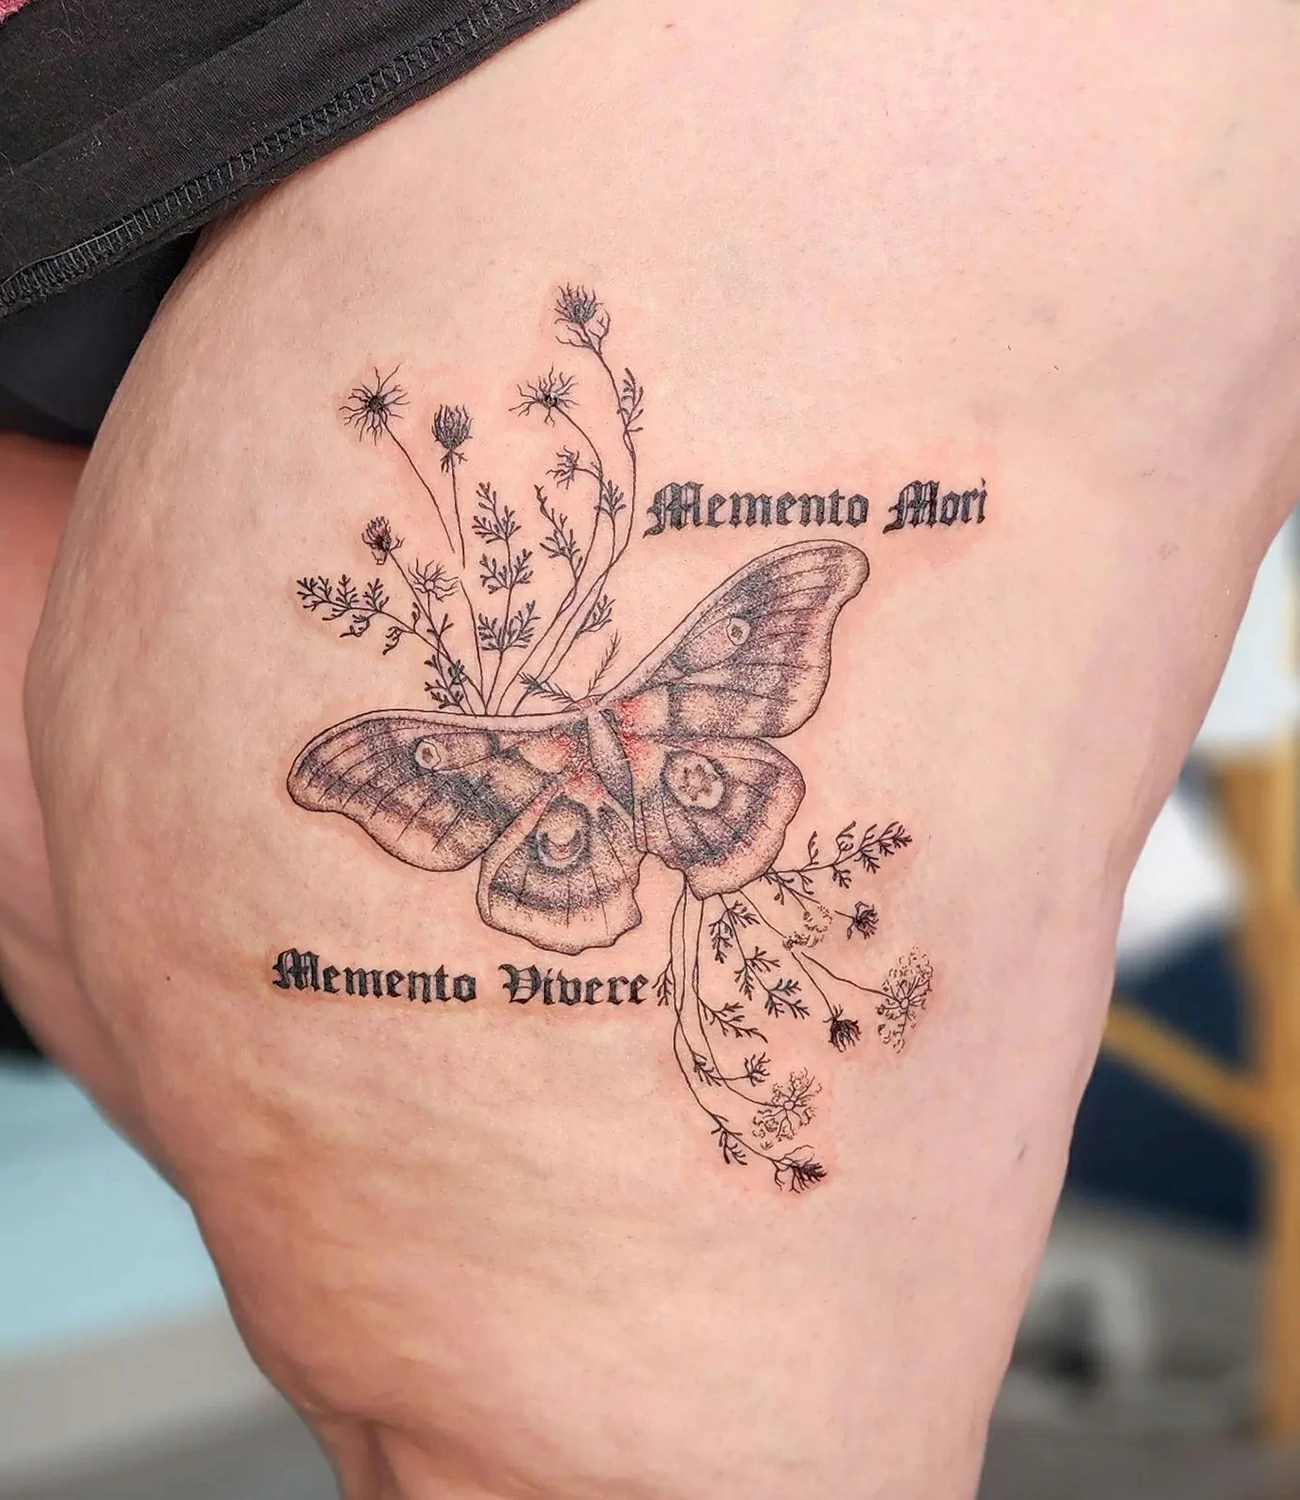 memento mori and memento vivere tattoo: A combined tattoo featuring both "memento mori" and "memento vivere," possibly arranged in a complementary design.